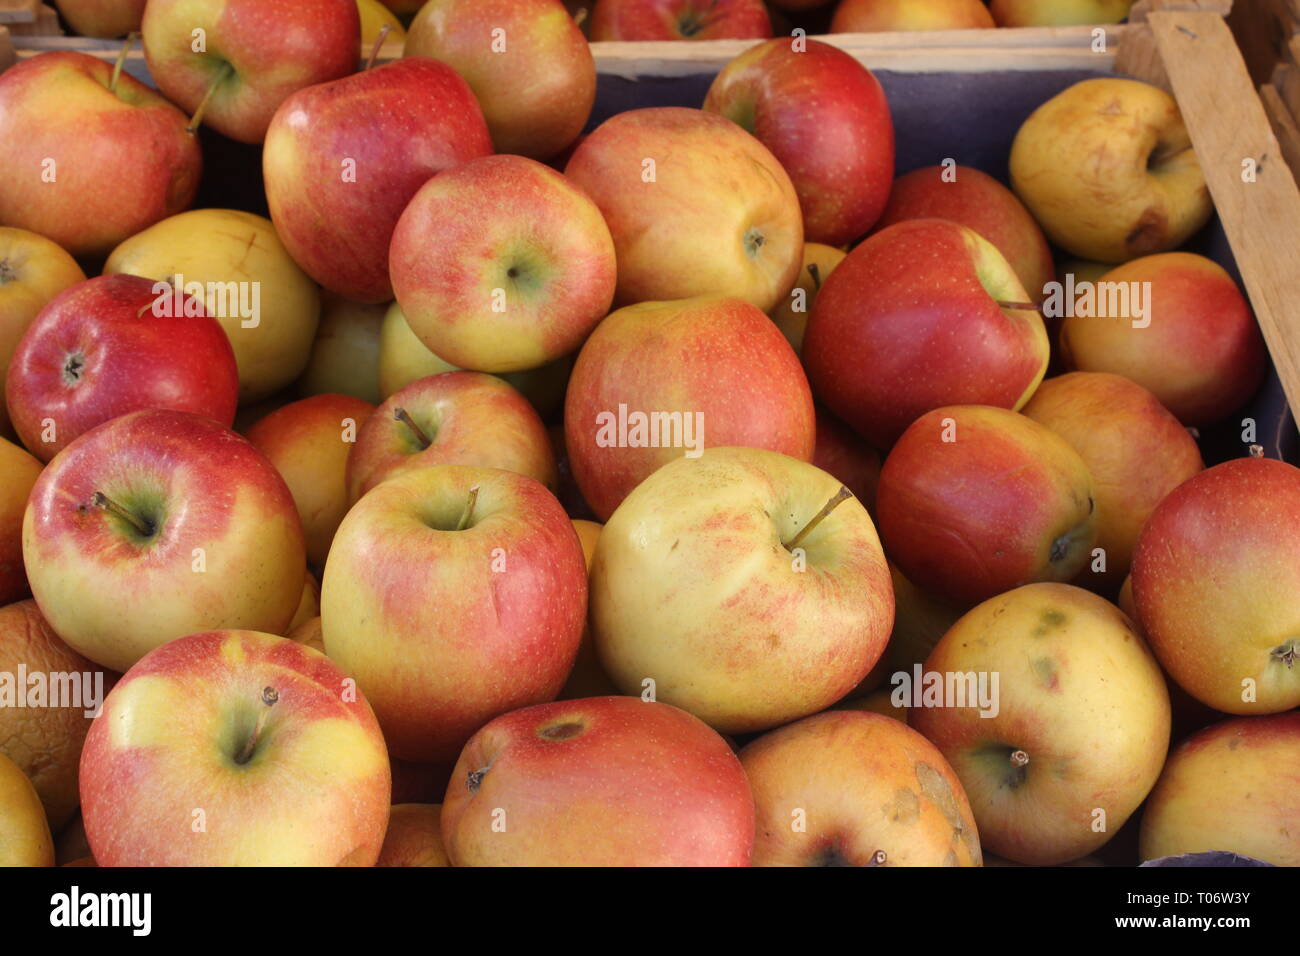 Close-up of Braeburn apples. Authentic product in unsorted sizes with natural faults, fresh picked from tree. Stock Photo